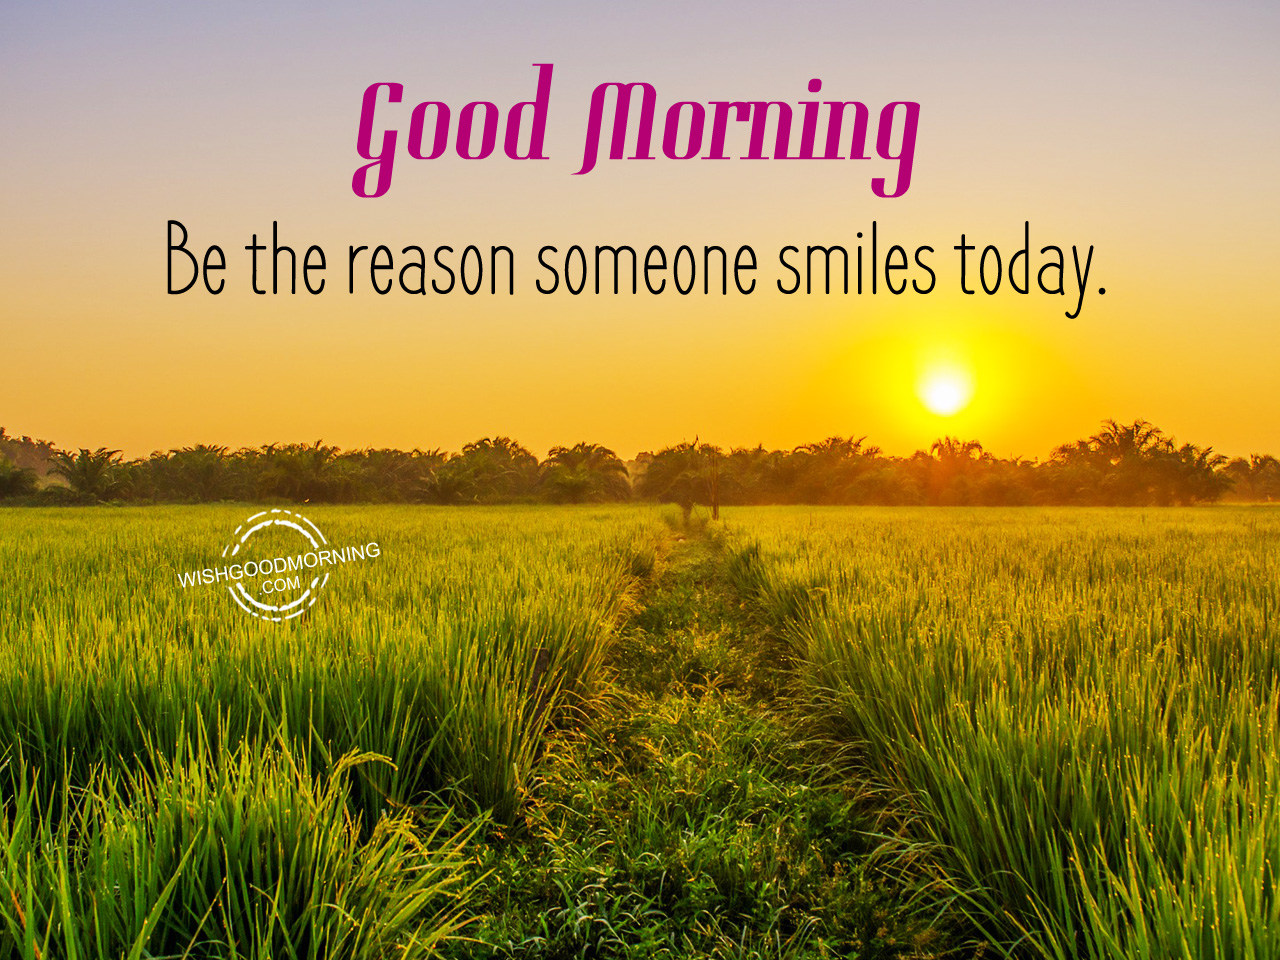 Good Morning- Be The Reason Someone Smiles Today - Good Morning ...